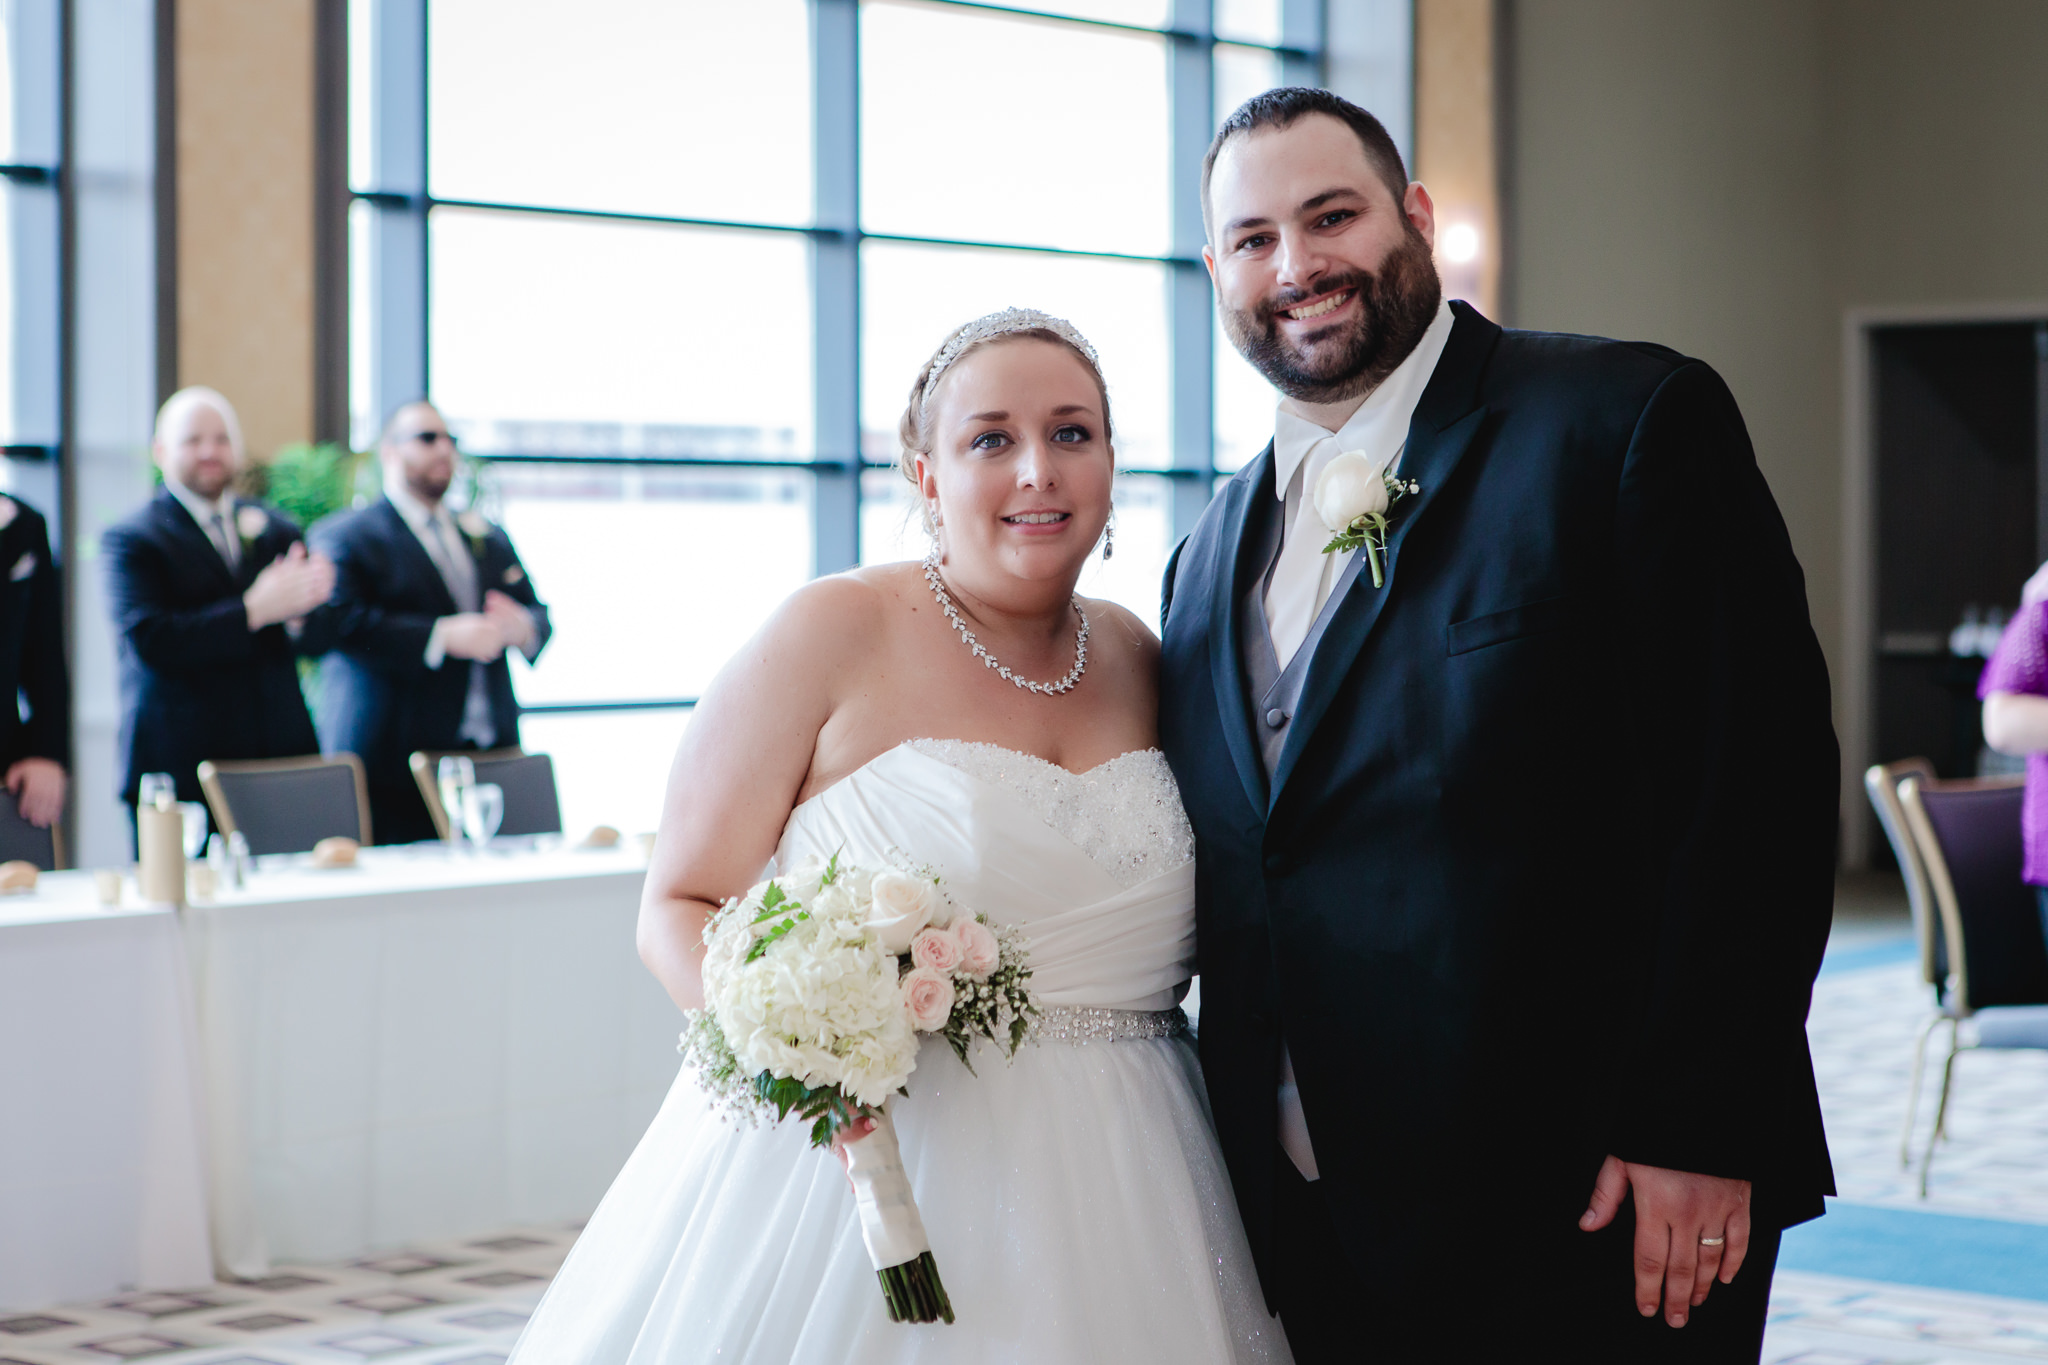 Bride & groom smile for a photo at their Duquesne University wedding reception